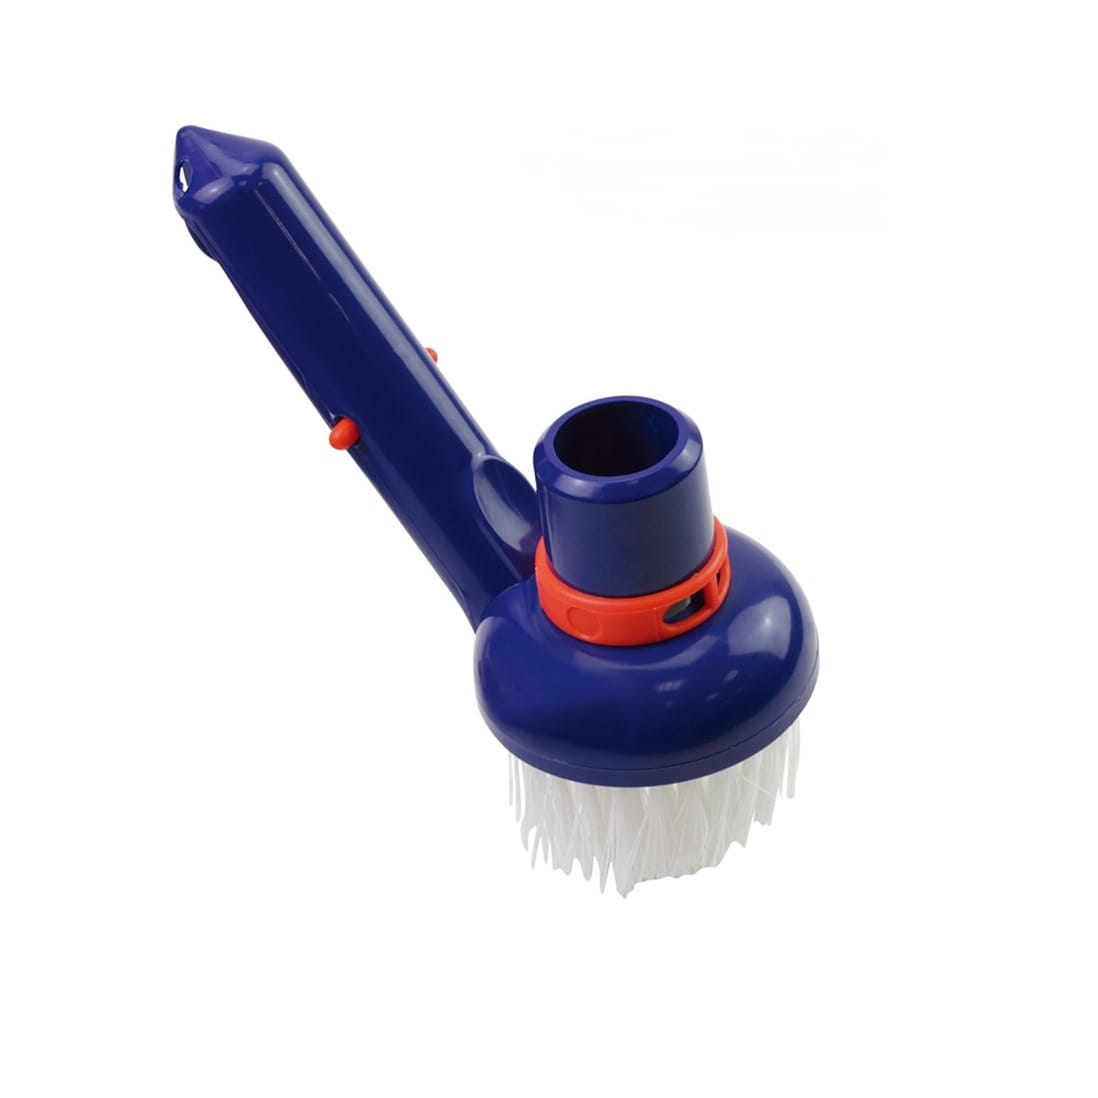  Swimming Pool Step Corner Brush Hand-held Scrub Brush Plastic  Cleaning Brush Blue Door Window Cleaning Tools with Fine Bristles for Hot  Tubs SPA : Patio, Lawn & Garden